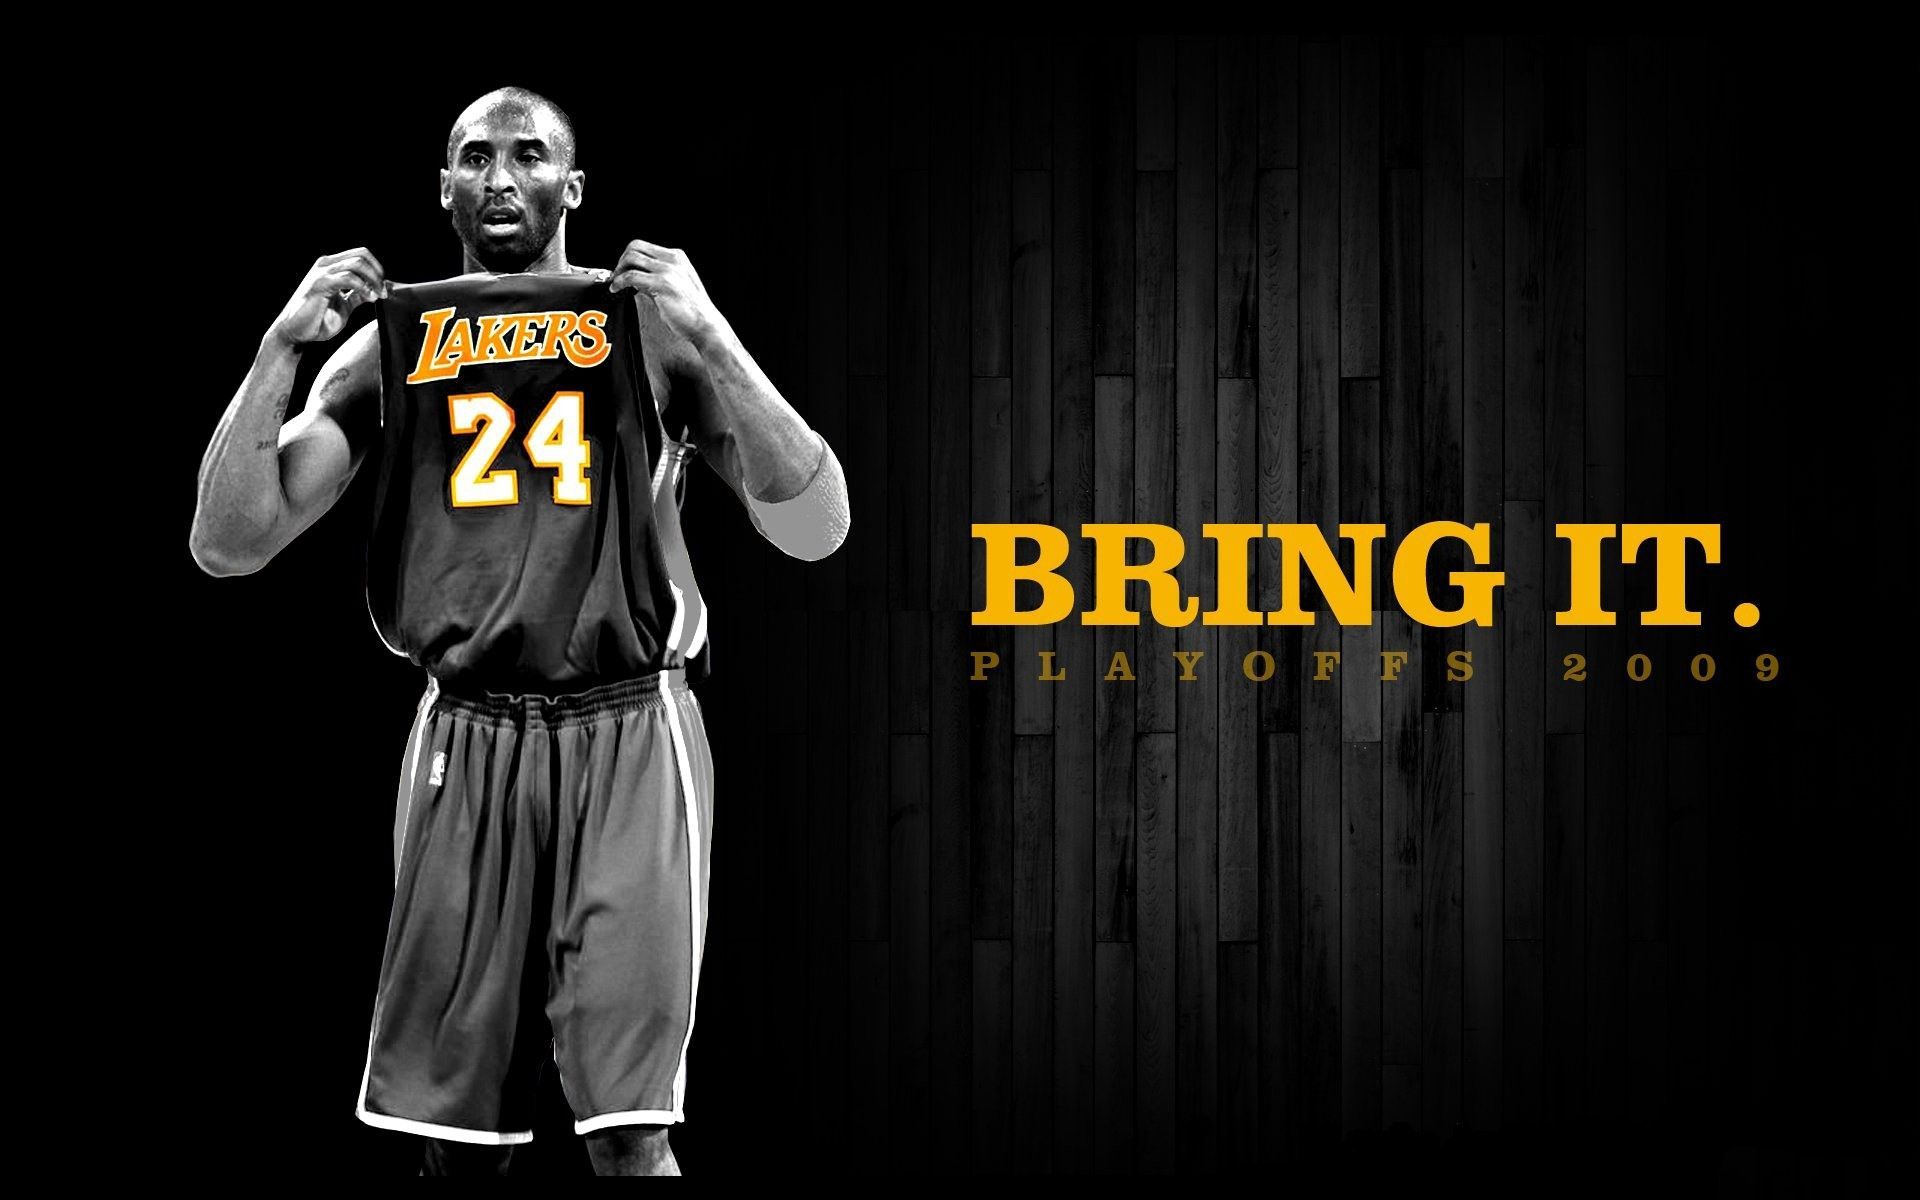 NBA Wallpaper HD. Wallpaper, Background, Image, Art Photo. Kobe bryant wallpaper, Kobe bryant, Kobe bryant quotes